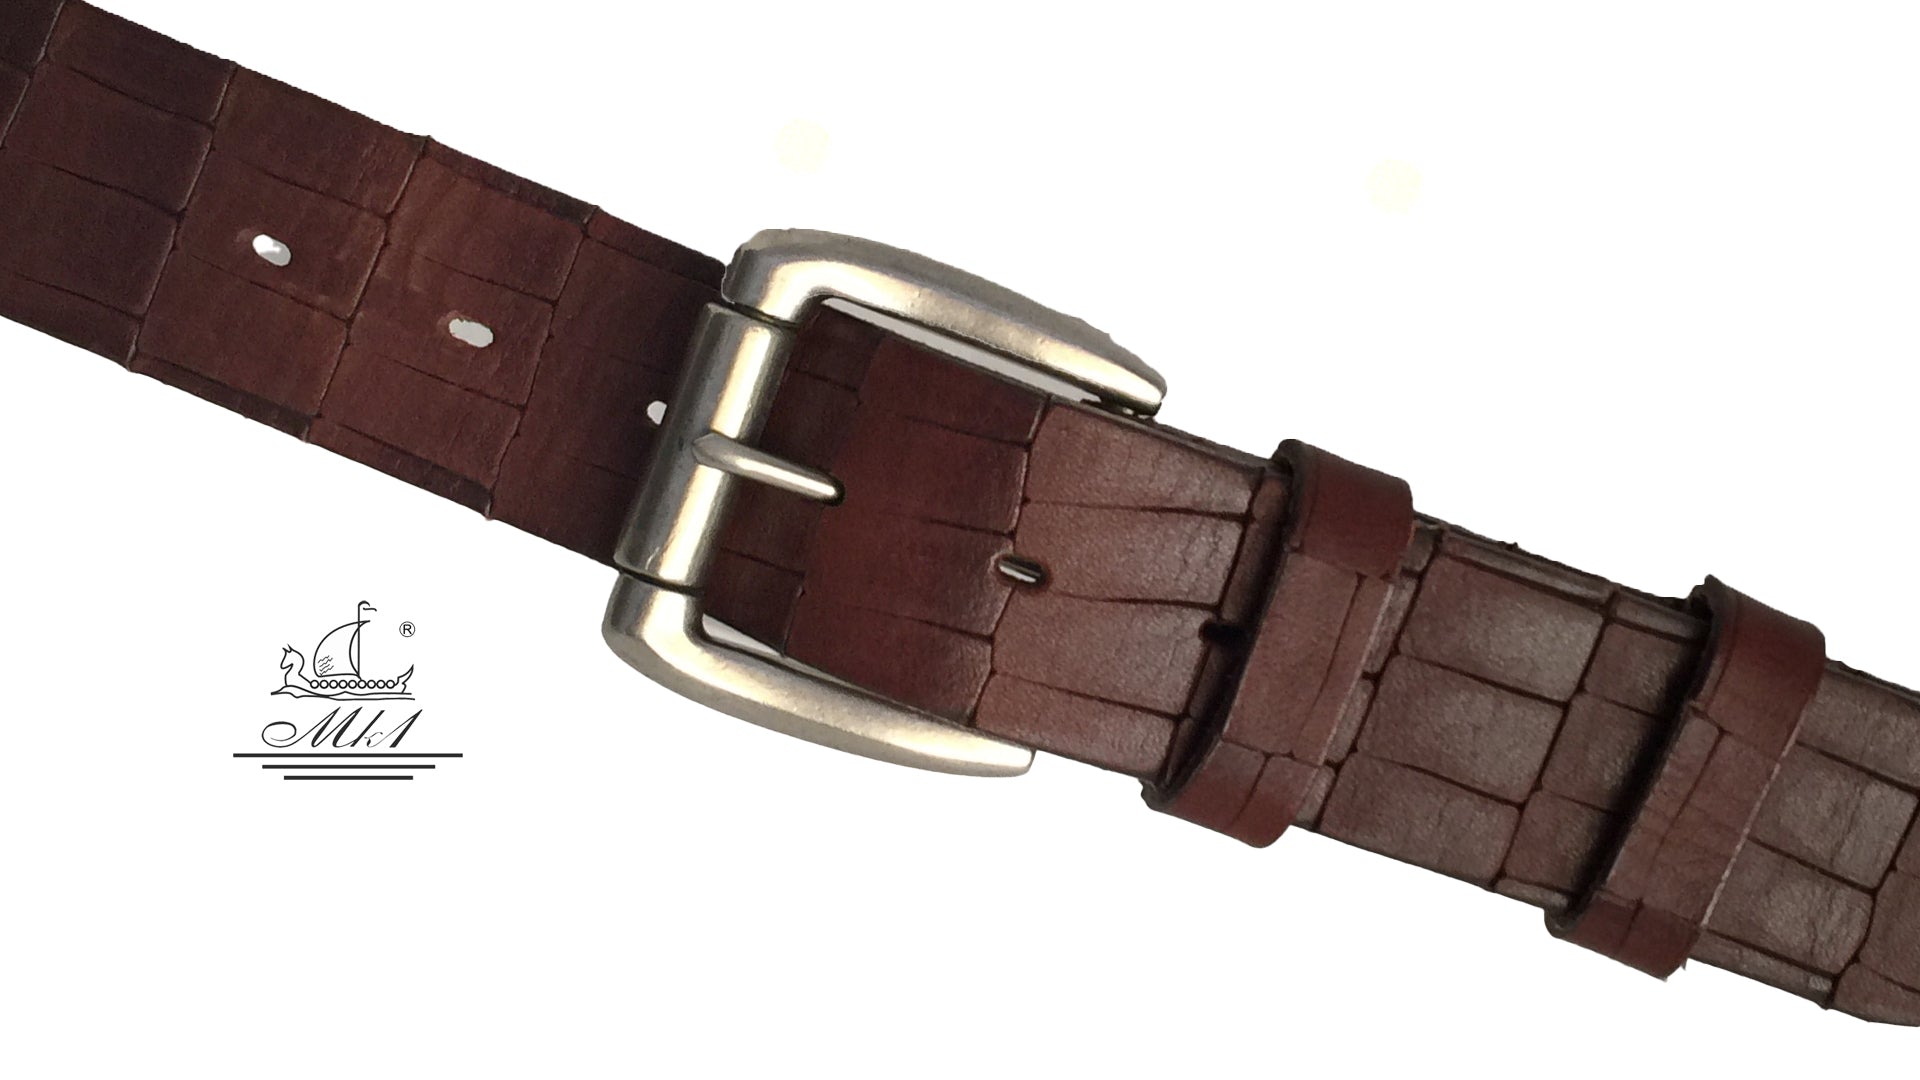 22/40k-kr Hand made  leather belt, 4 cm width, and  roll buckle.